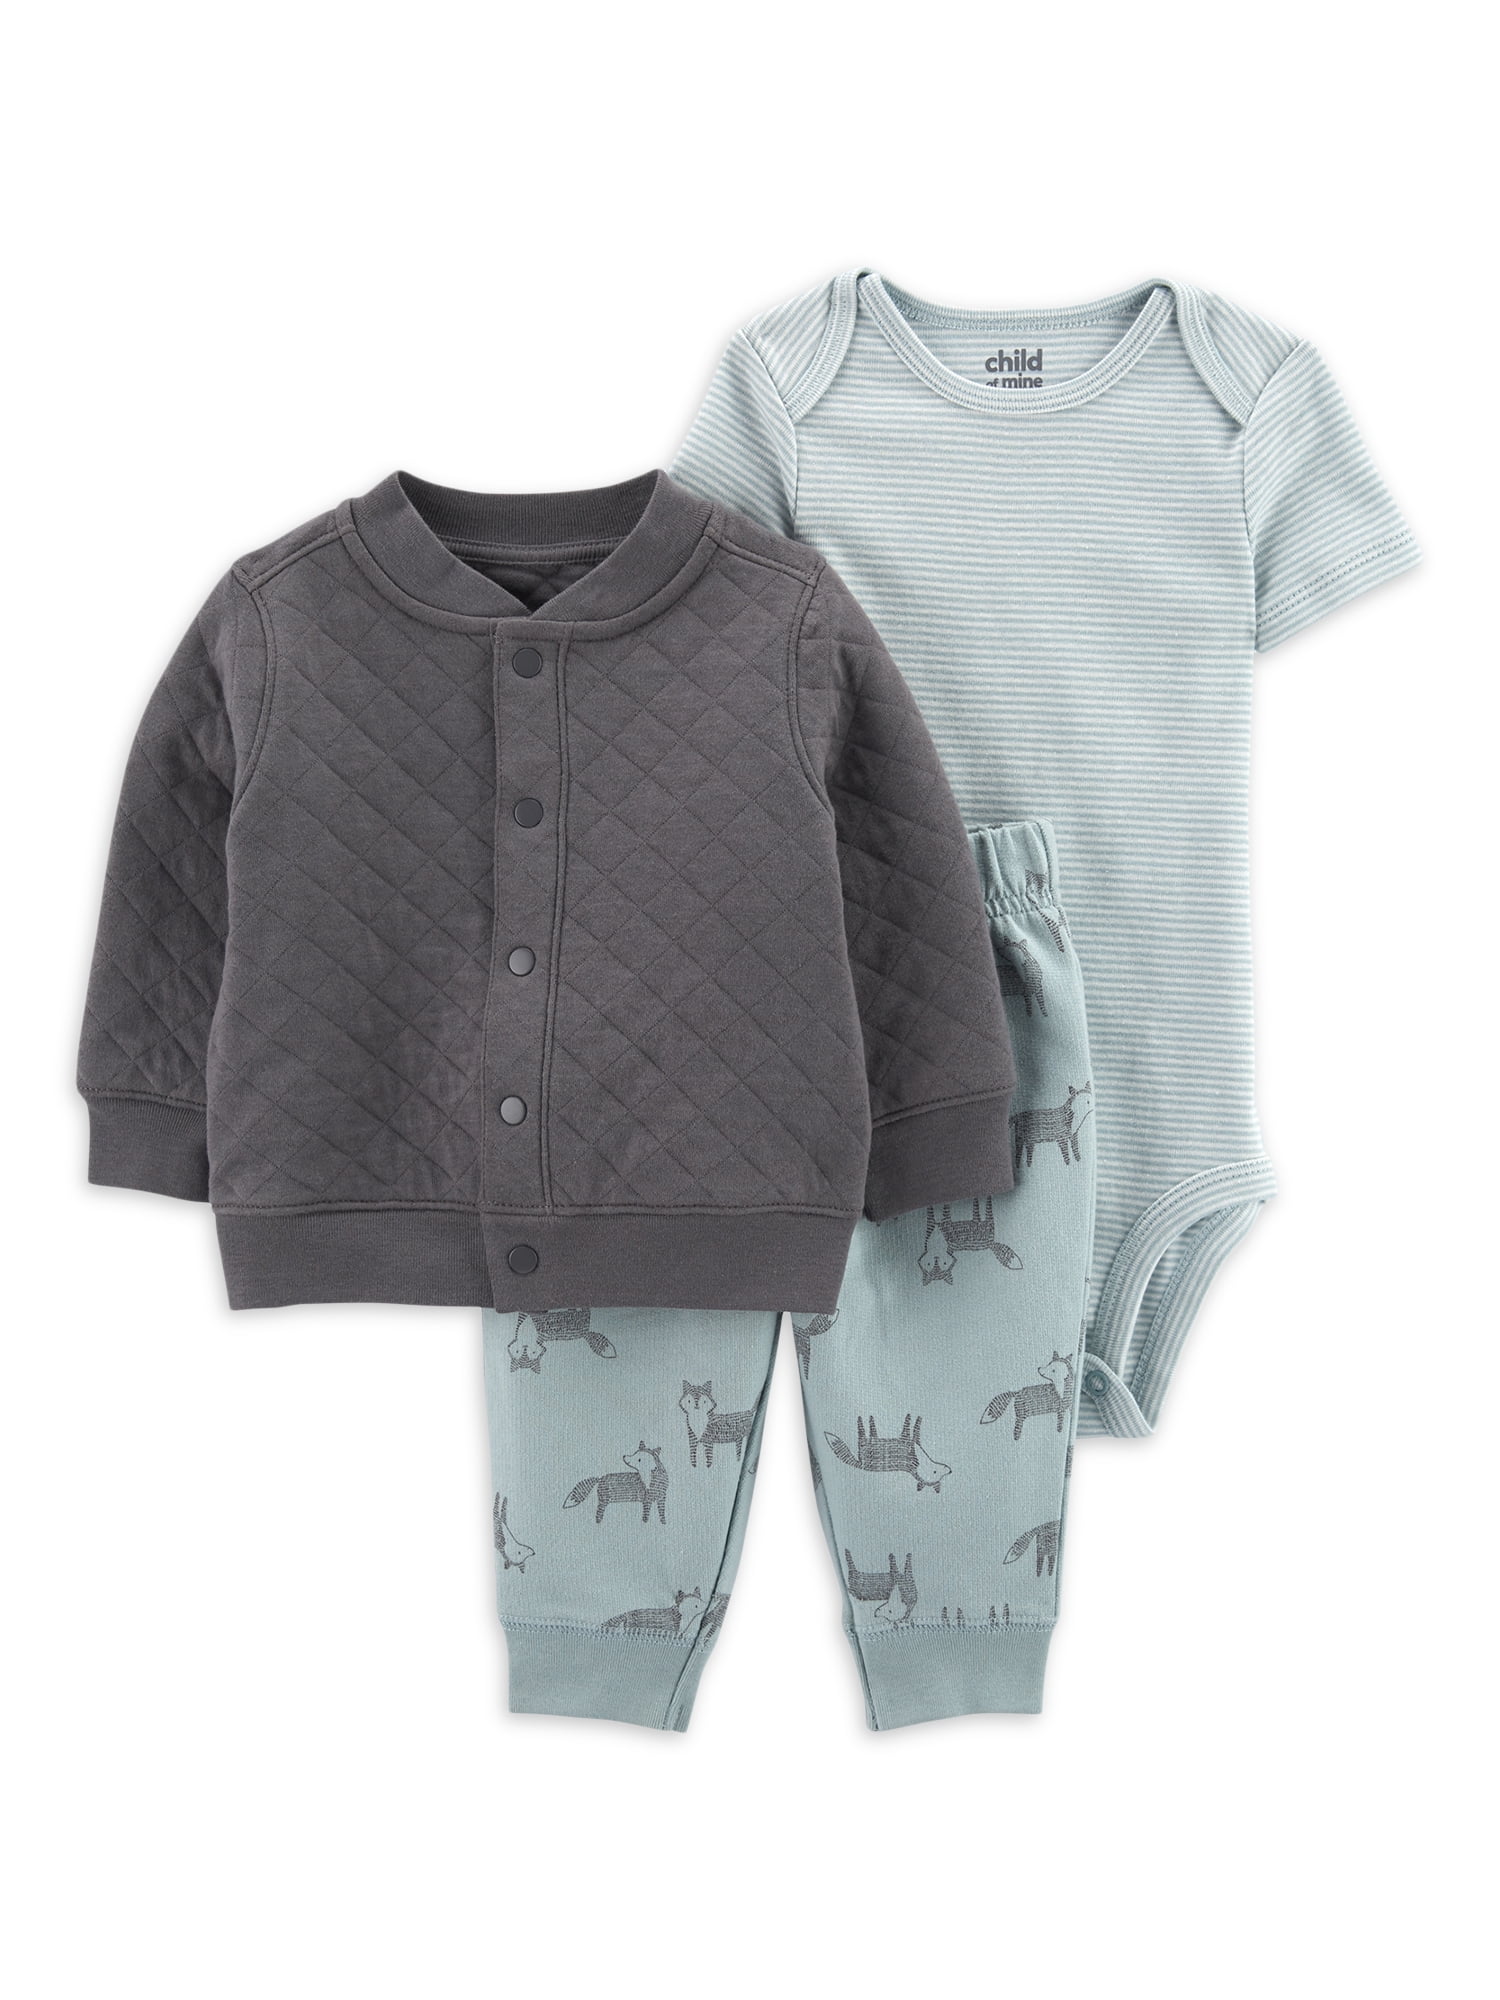 Carter's Child of Mine Baby Boy Cardigan Outfit Set, 3-Piece, Sizes 0-24M